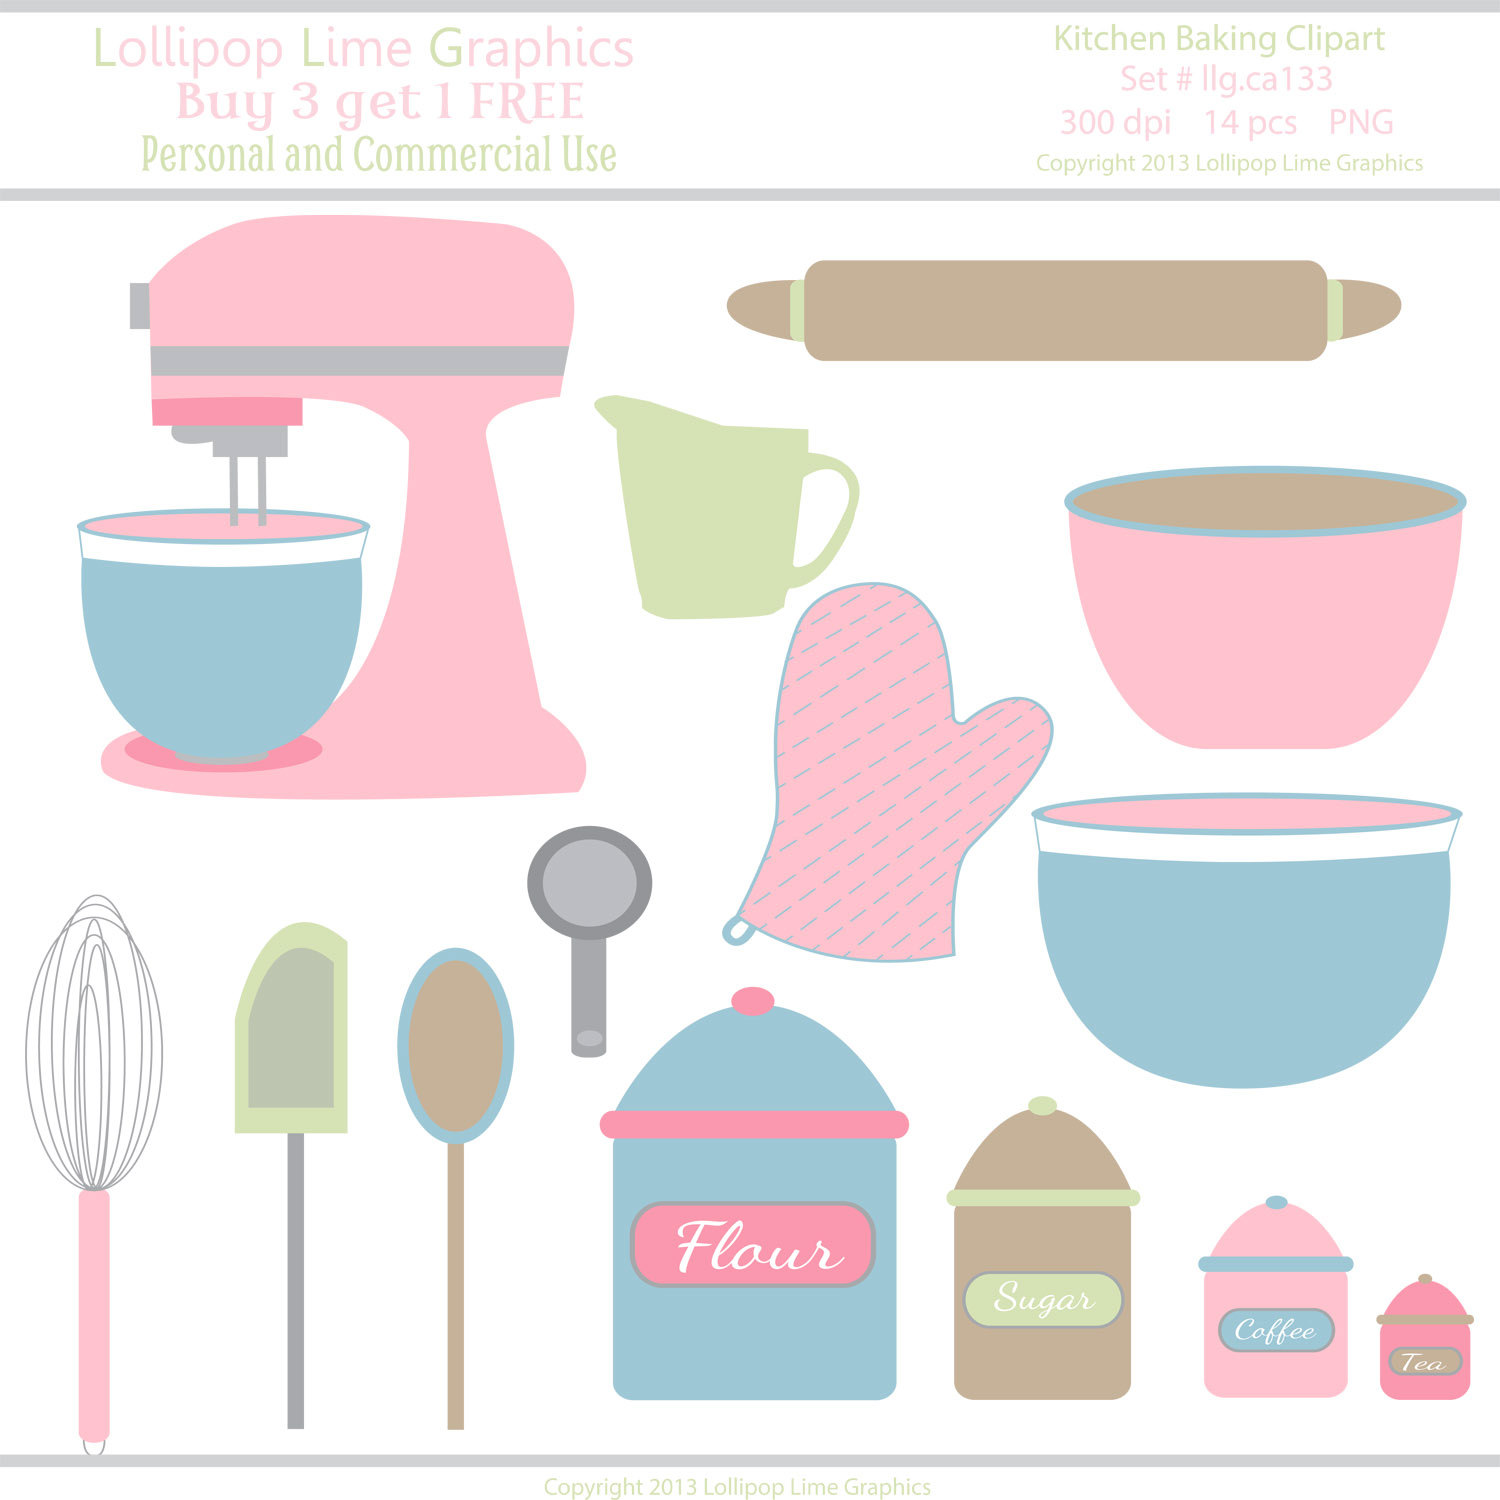 Popular Items For Baking Clipart On Etsy Baking Clipart Kitchen